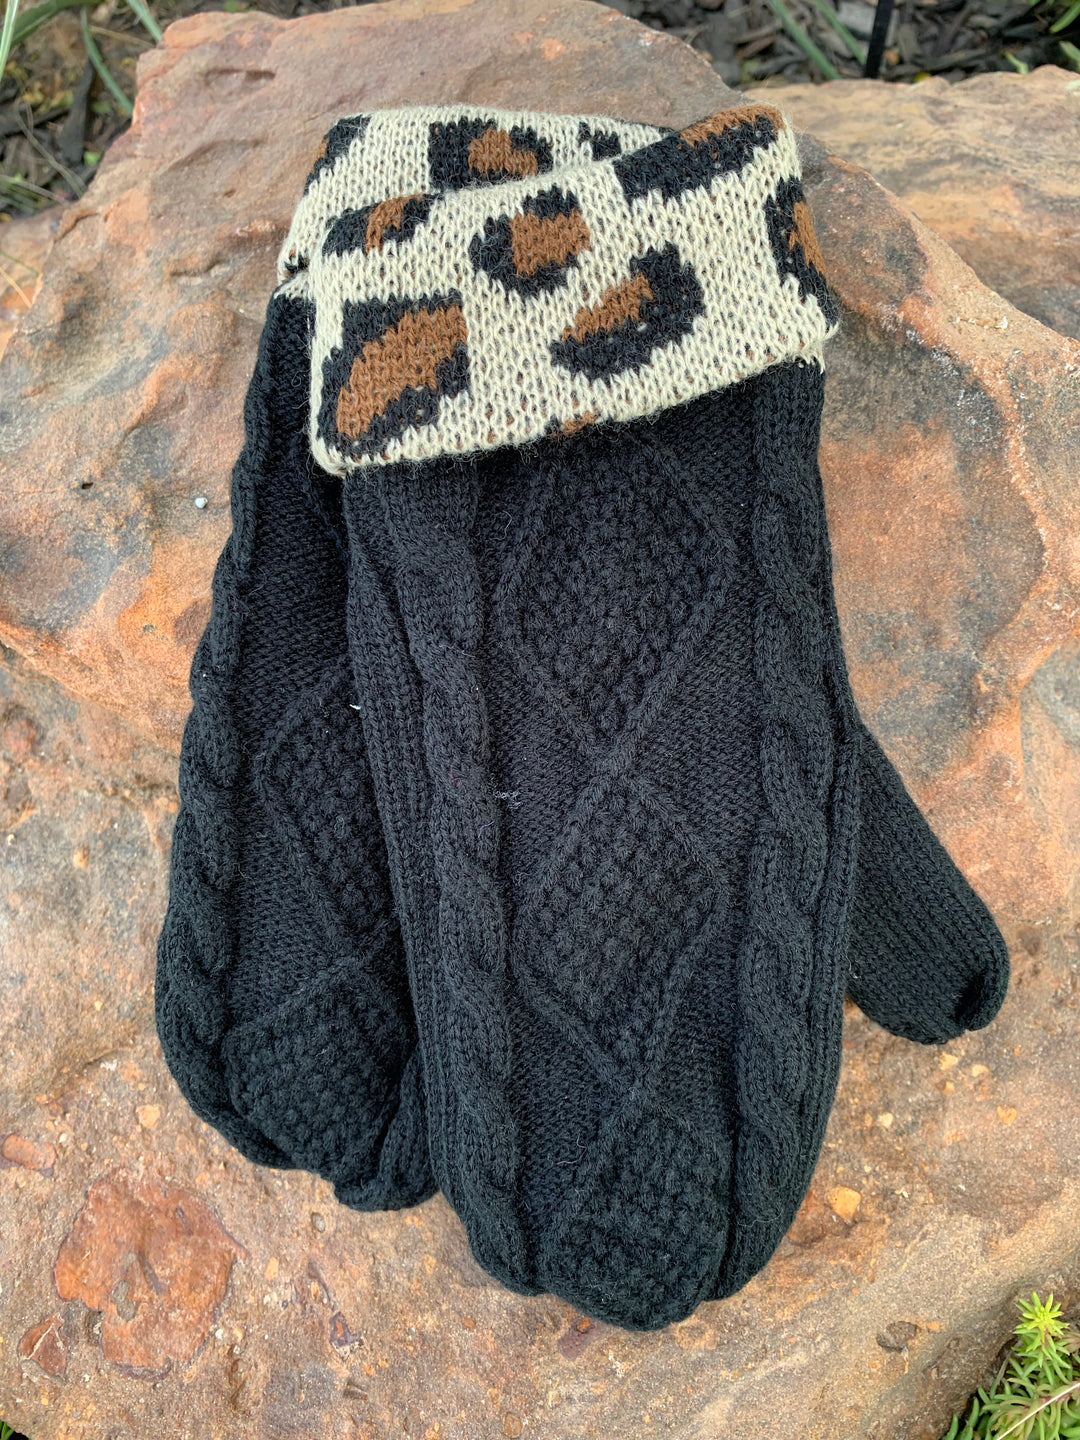 Black & Leopard Cable Knit Mittens